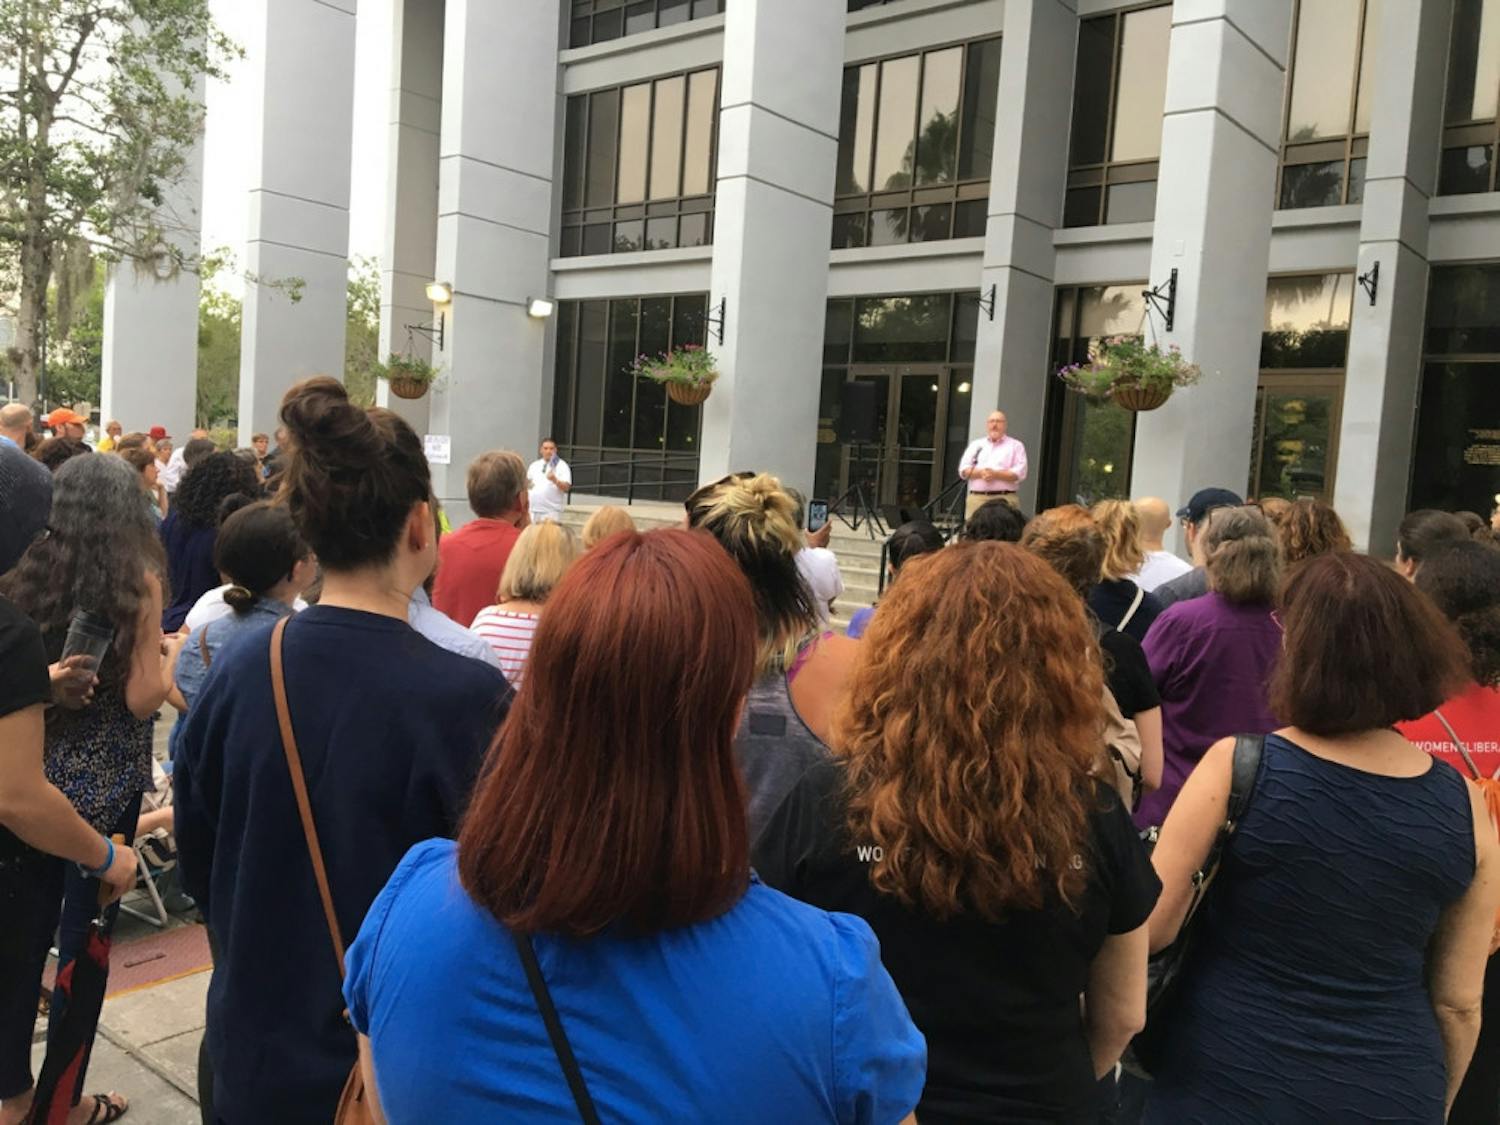 More than 300 people gather outside Gainesville City Hall to listen to Commissioner Harvey Ward Jr. speak about the Charlottesville, Virginia white supremacy rally and encourage people to get involved with their community.